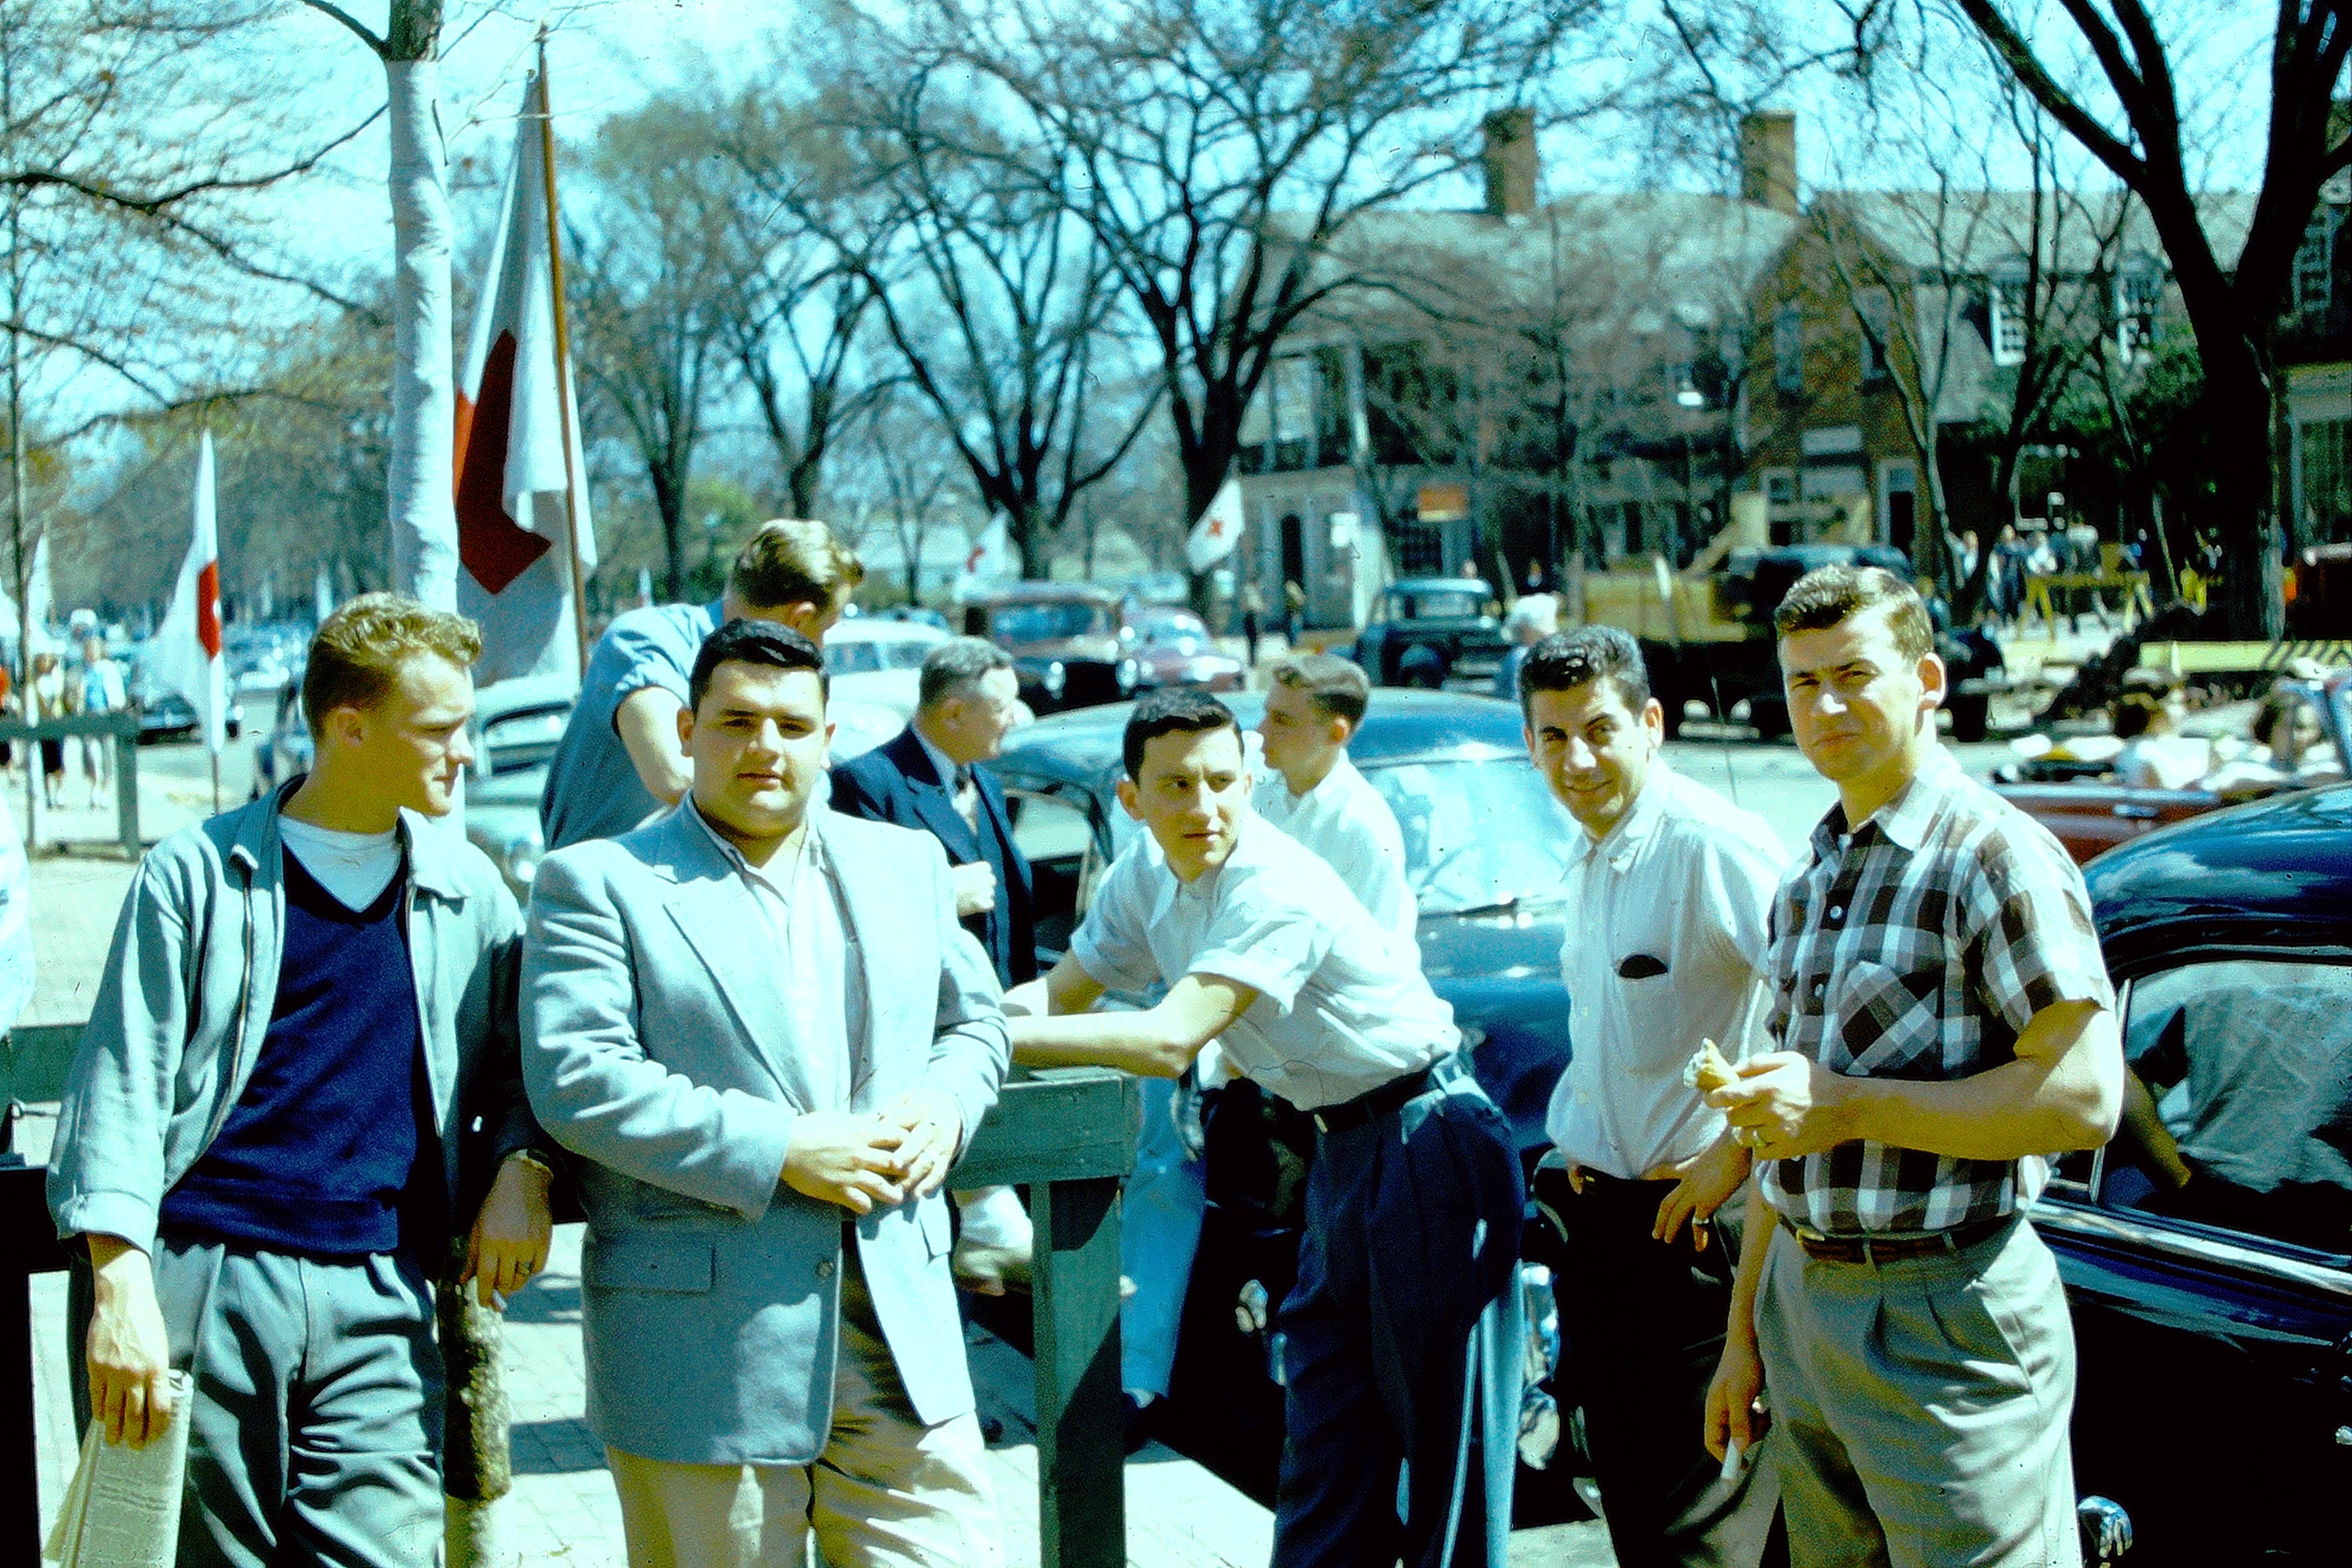 Al Grieco and friends on DOG St in 1954